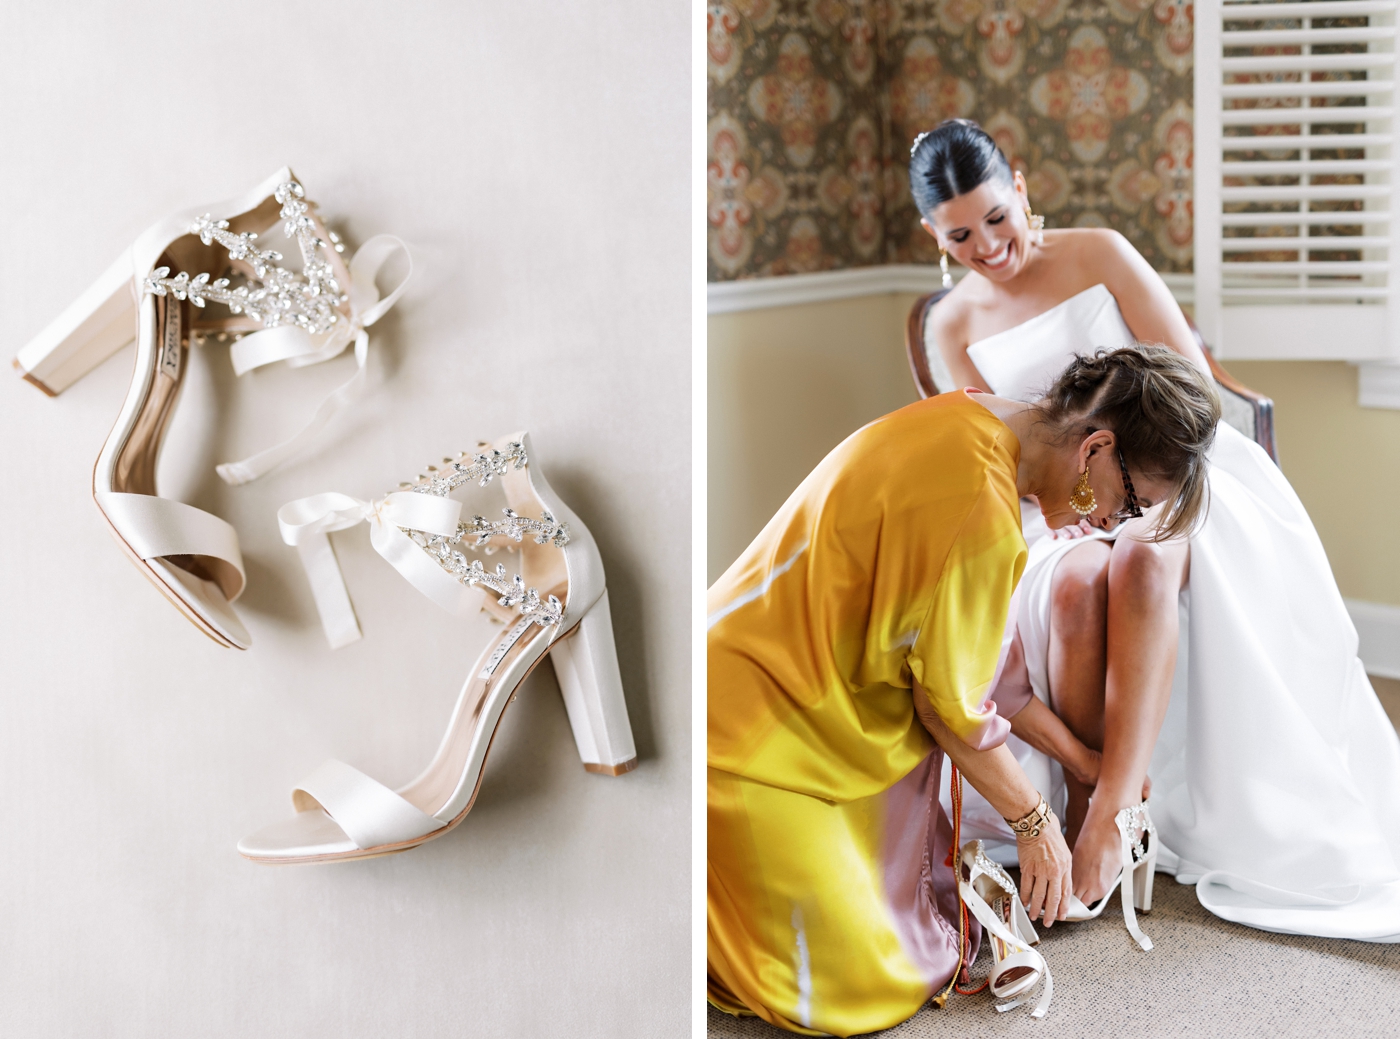 White bridal heels, with the brides mom helping her put them on